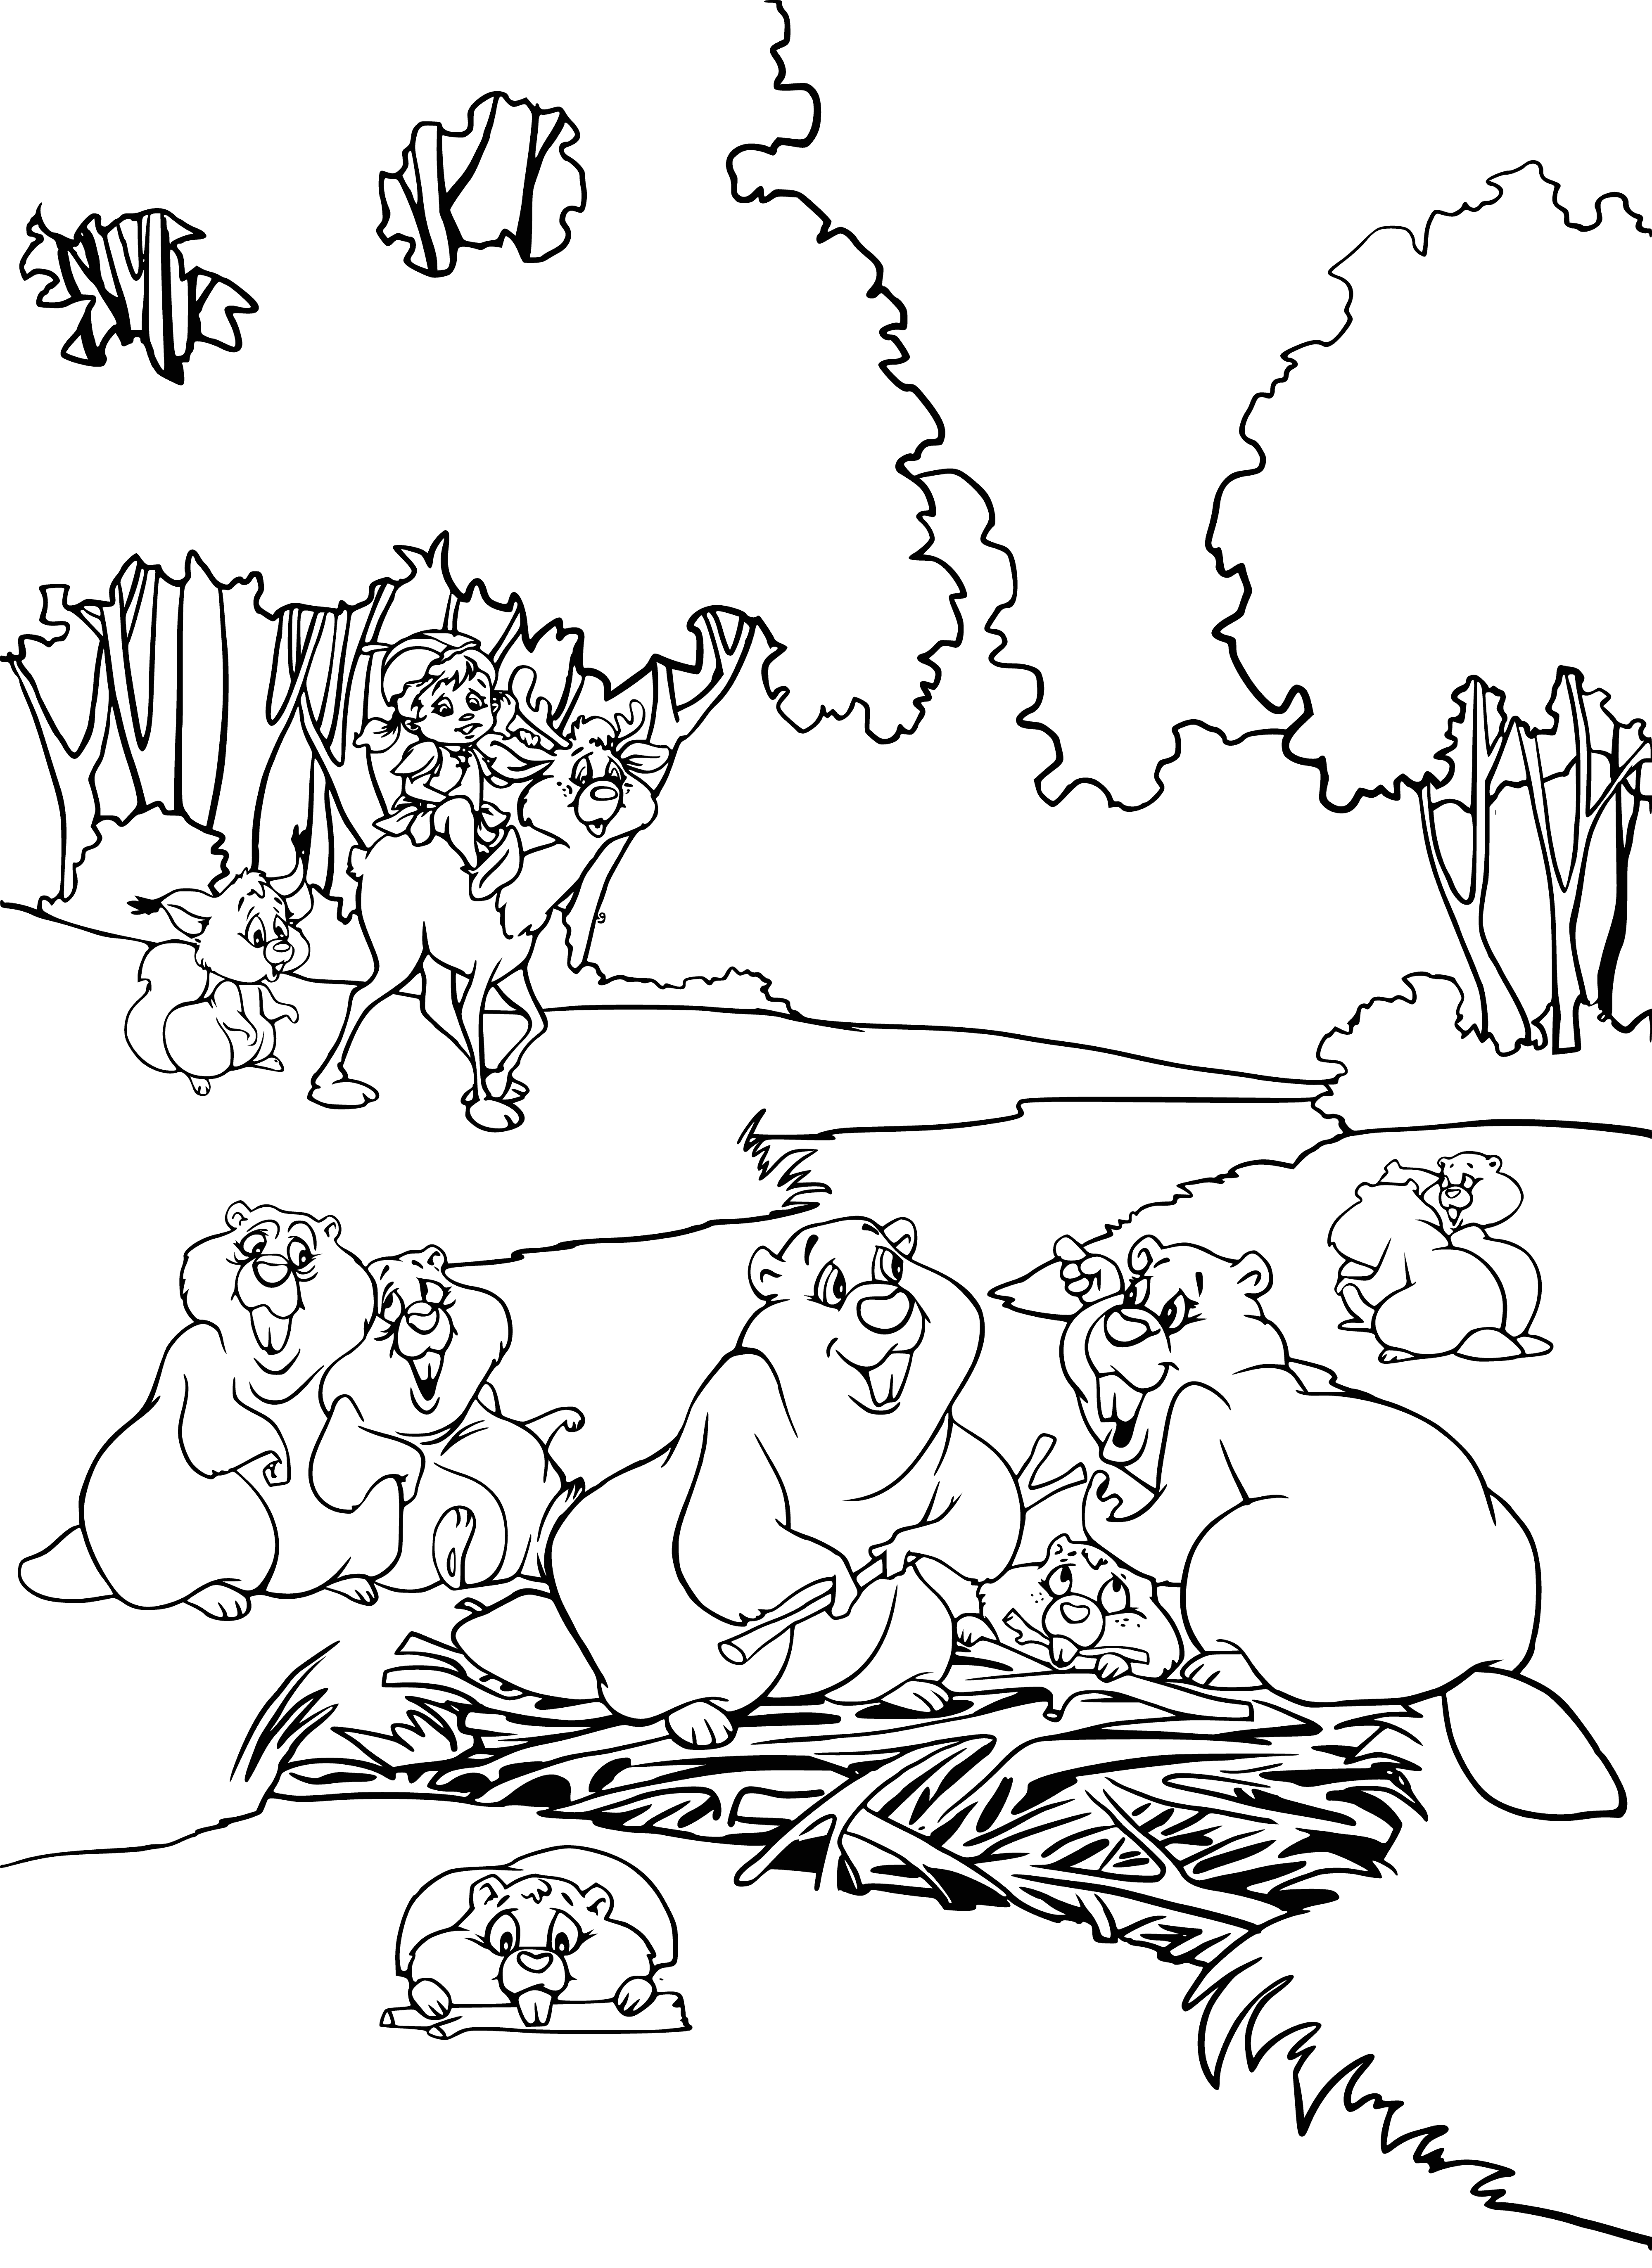 Beavers at the dam coloring page